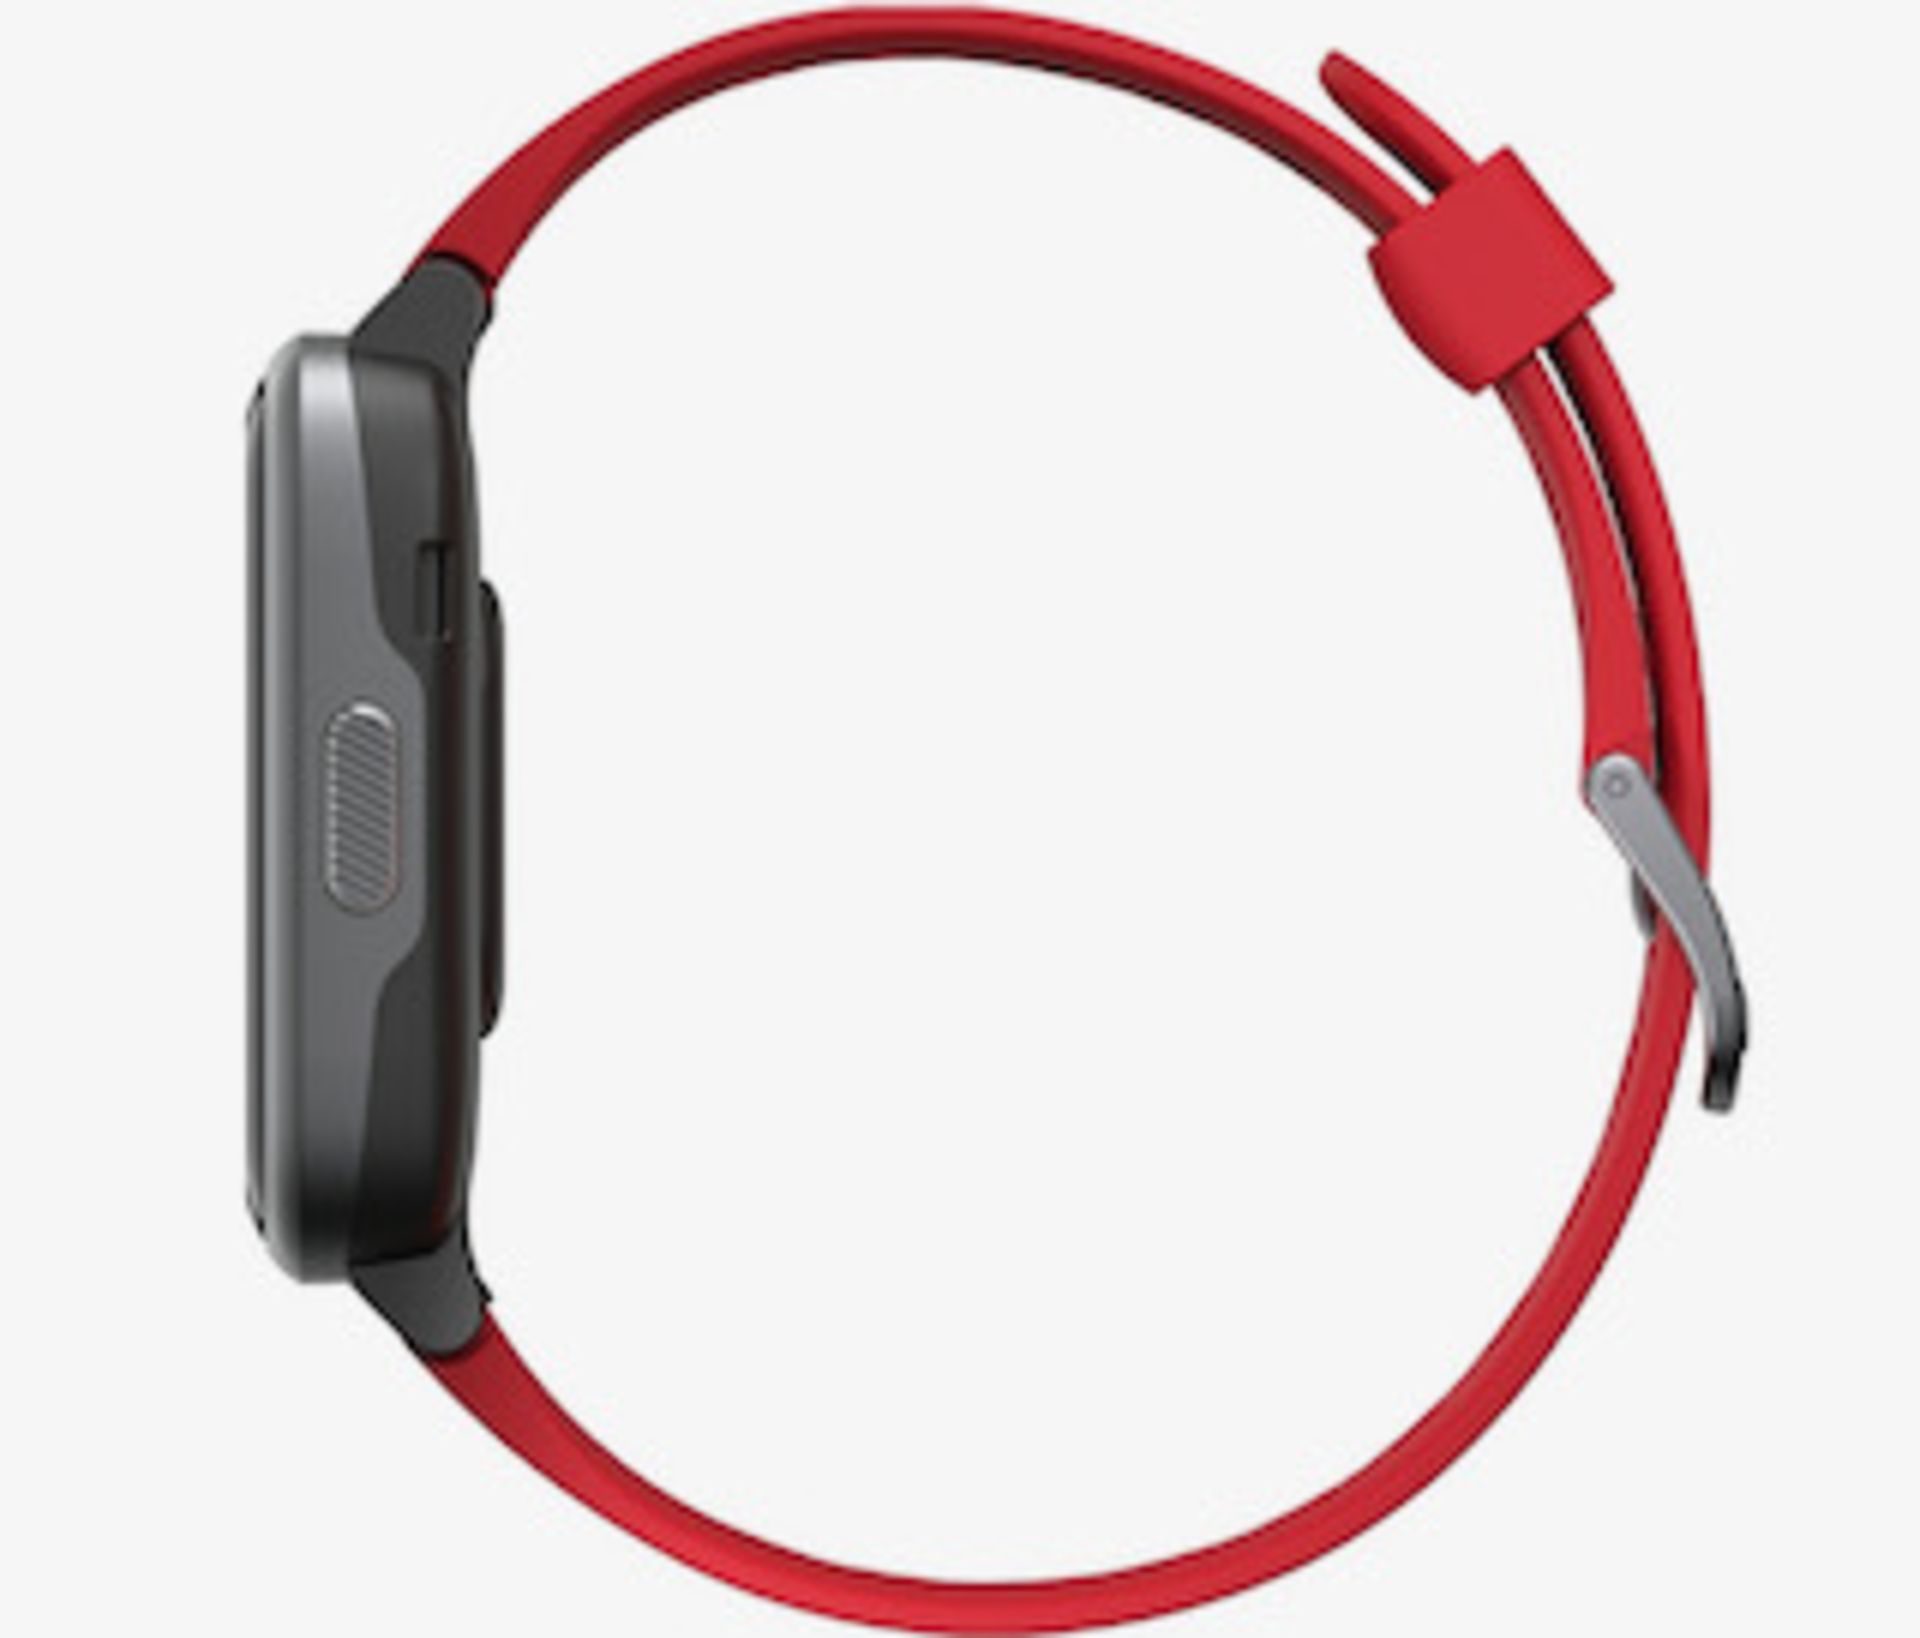 Brand New Unisex Fitness Tracker Watch Id205 Red Strap About This Item 1.3-Inch LCD Colour - Image 20 of 34